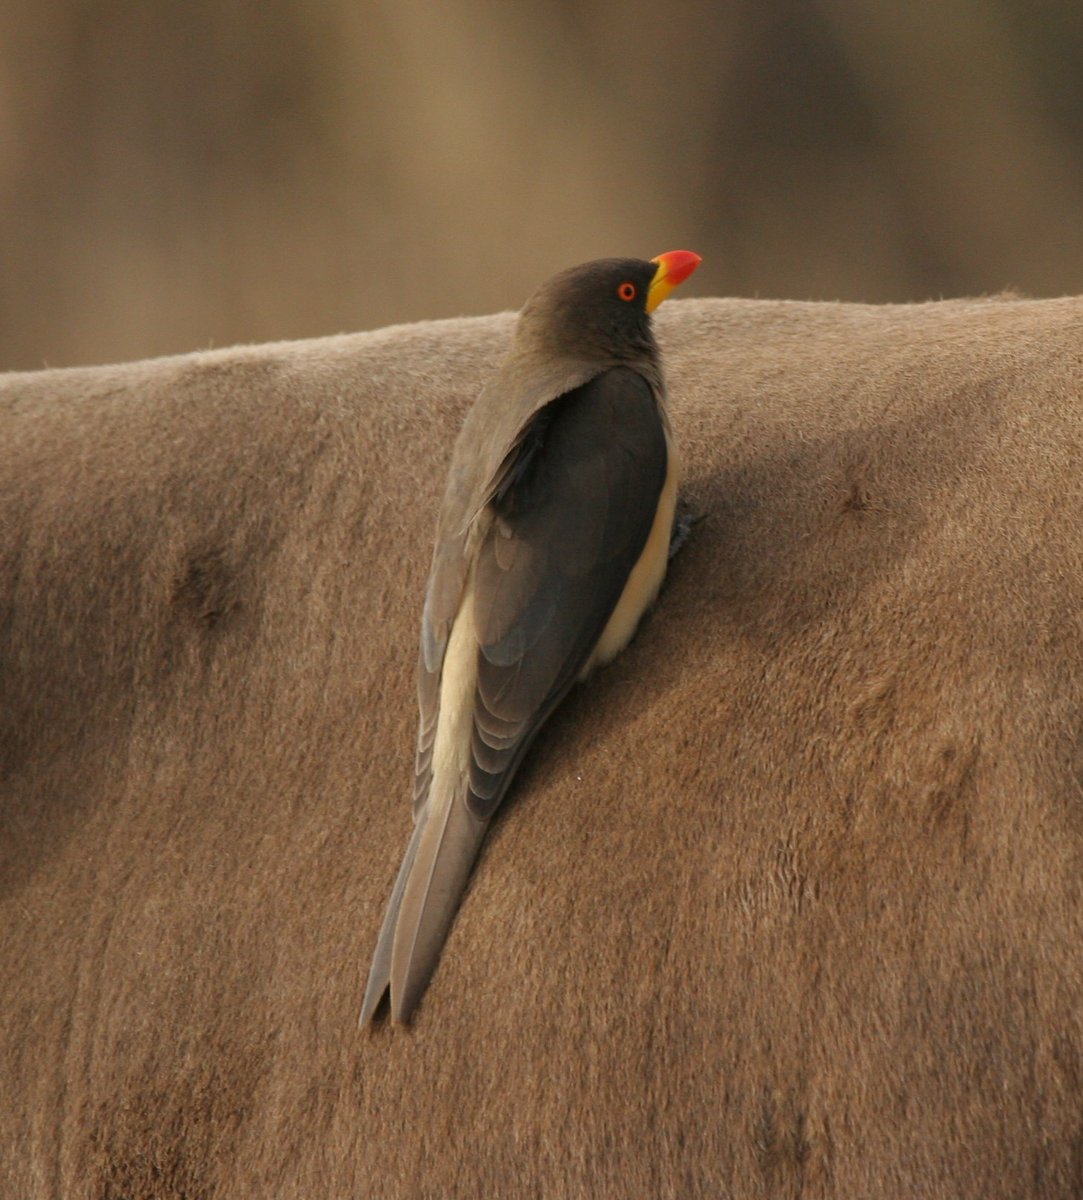 Red Billed Oxpecker the Gambia
boulthamere.blogspot.com